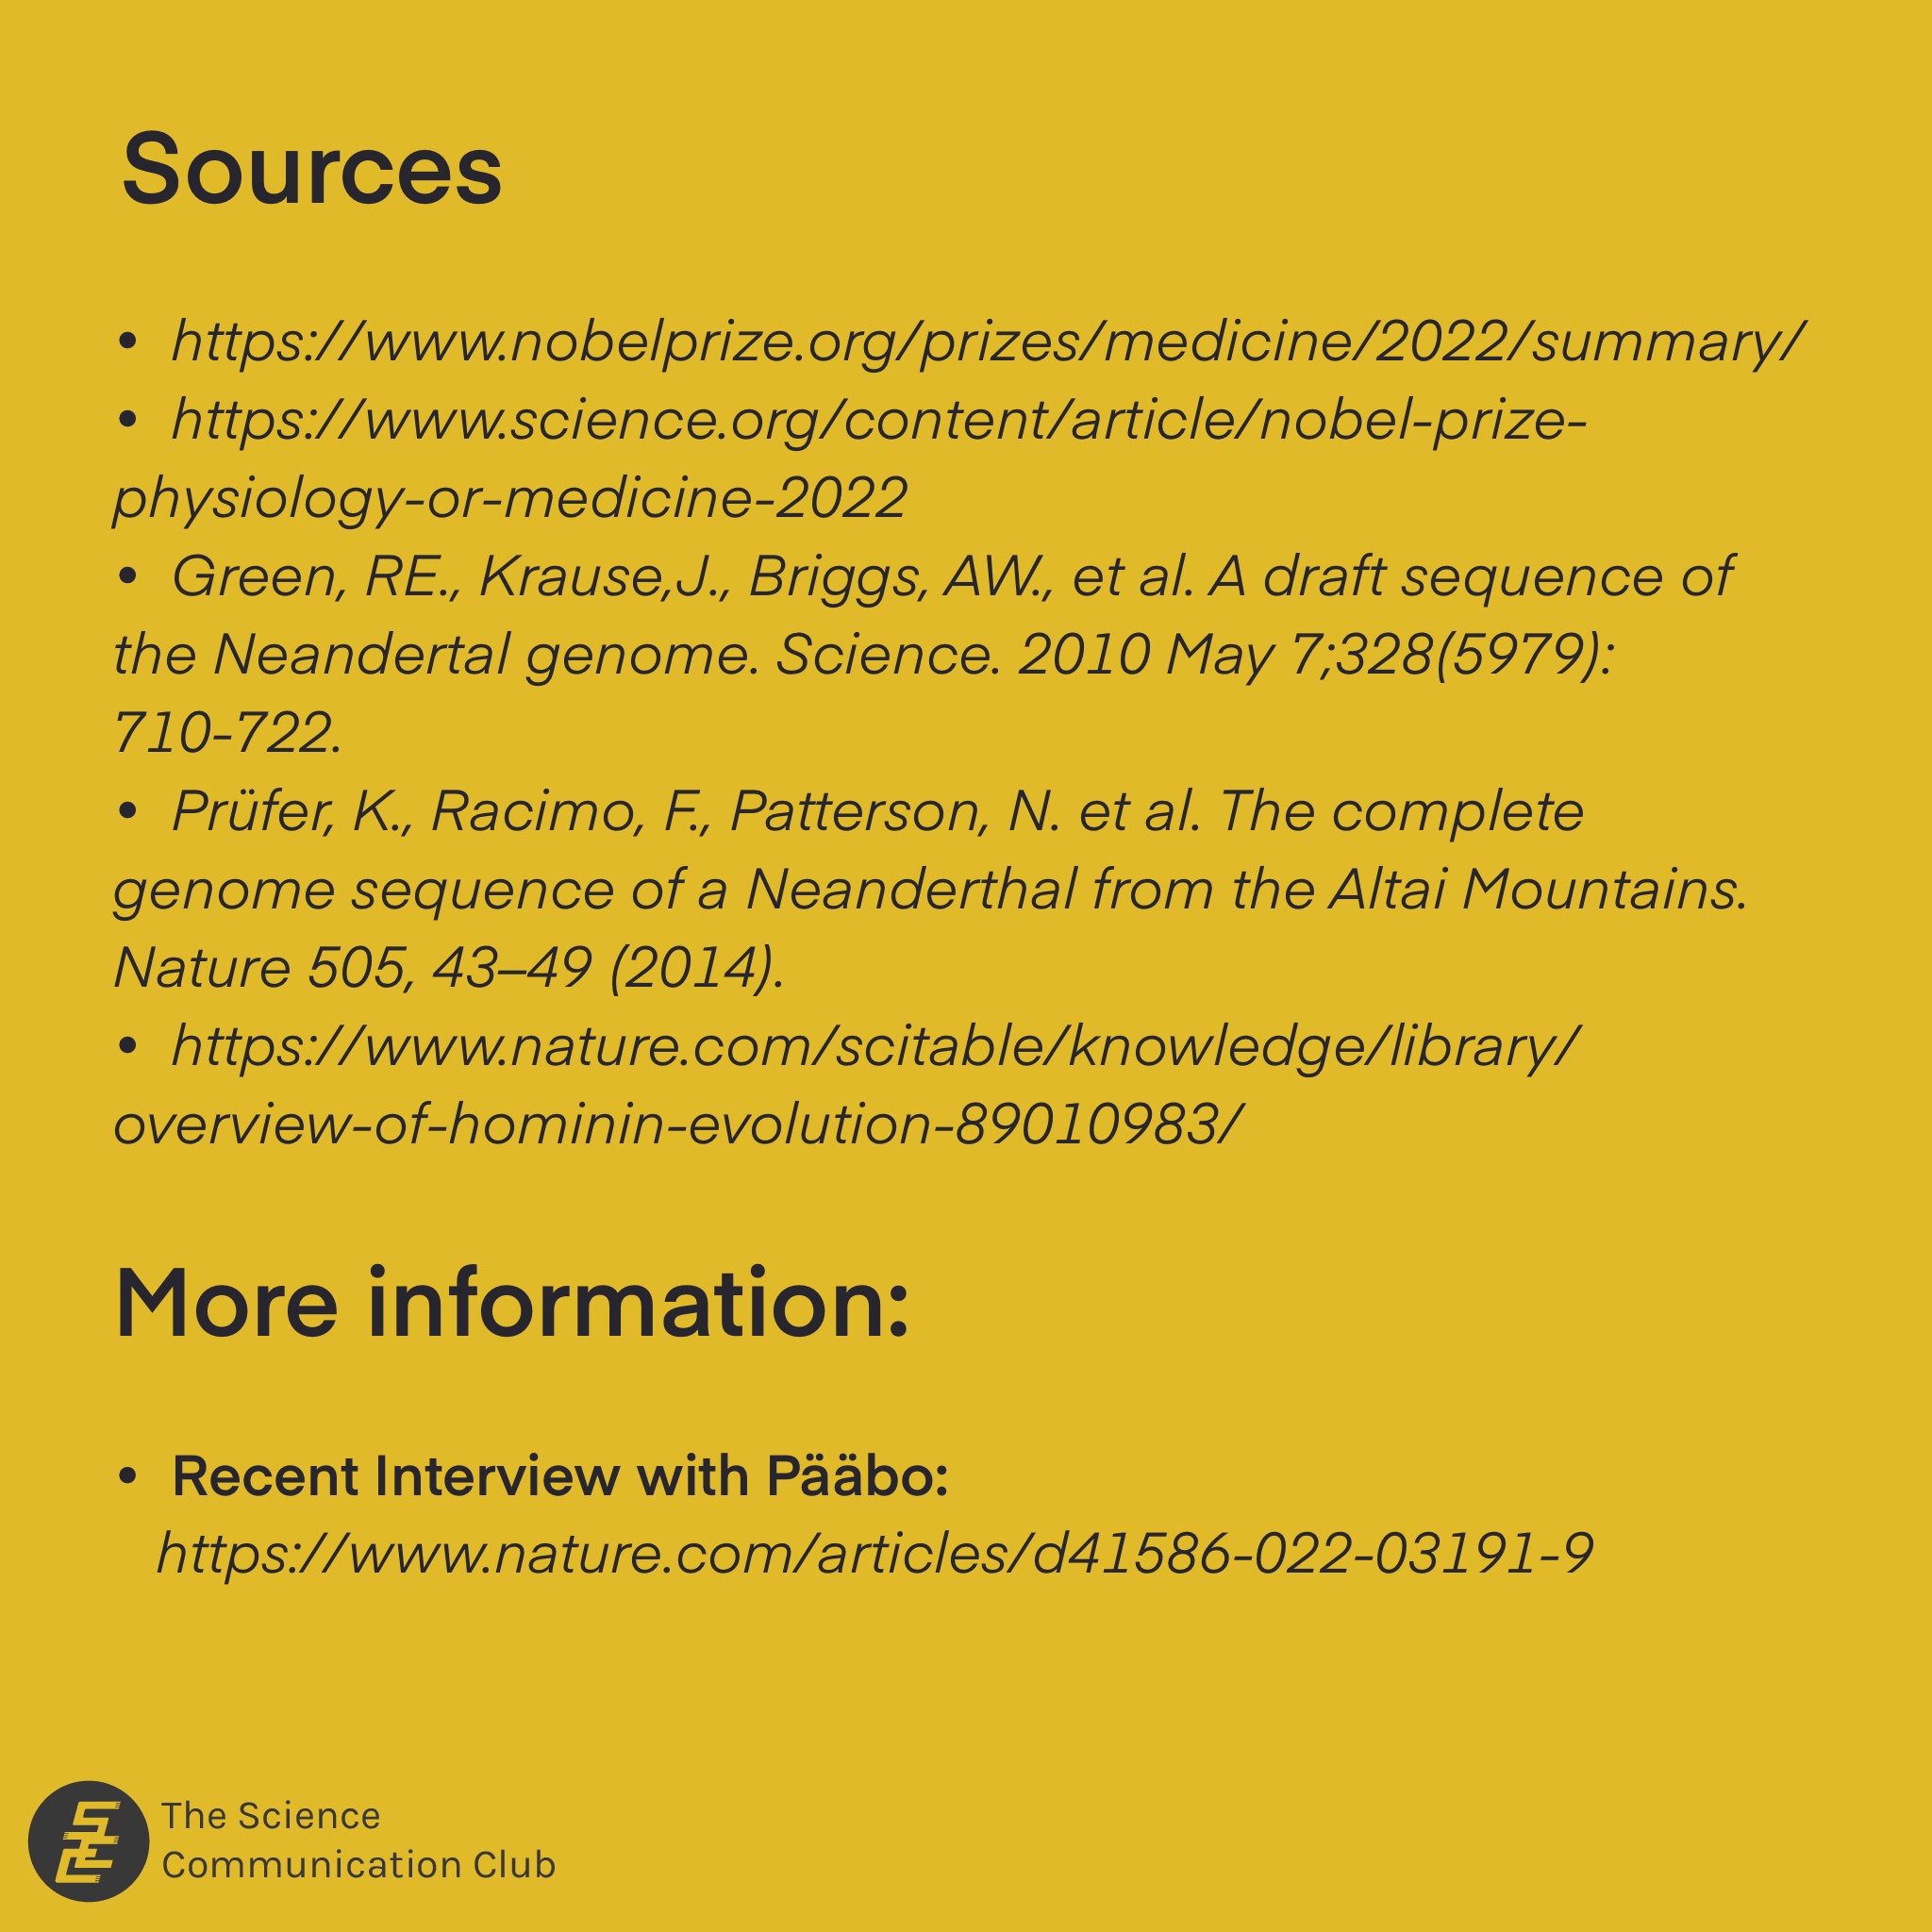 A list of sources used to create the infographics, including summary of Pääbo from nobelprizes.org and Science.org, his and 2010 and 2014 research studies on the Neanderthal genome , and an overview of hominin evolution from Nature.com. A recent Interview with Pääbo following the nobel prize announcement is listed for further information.